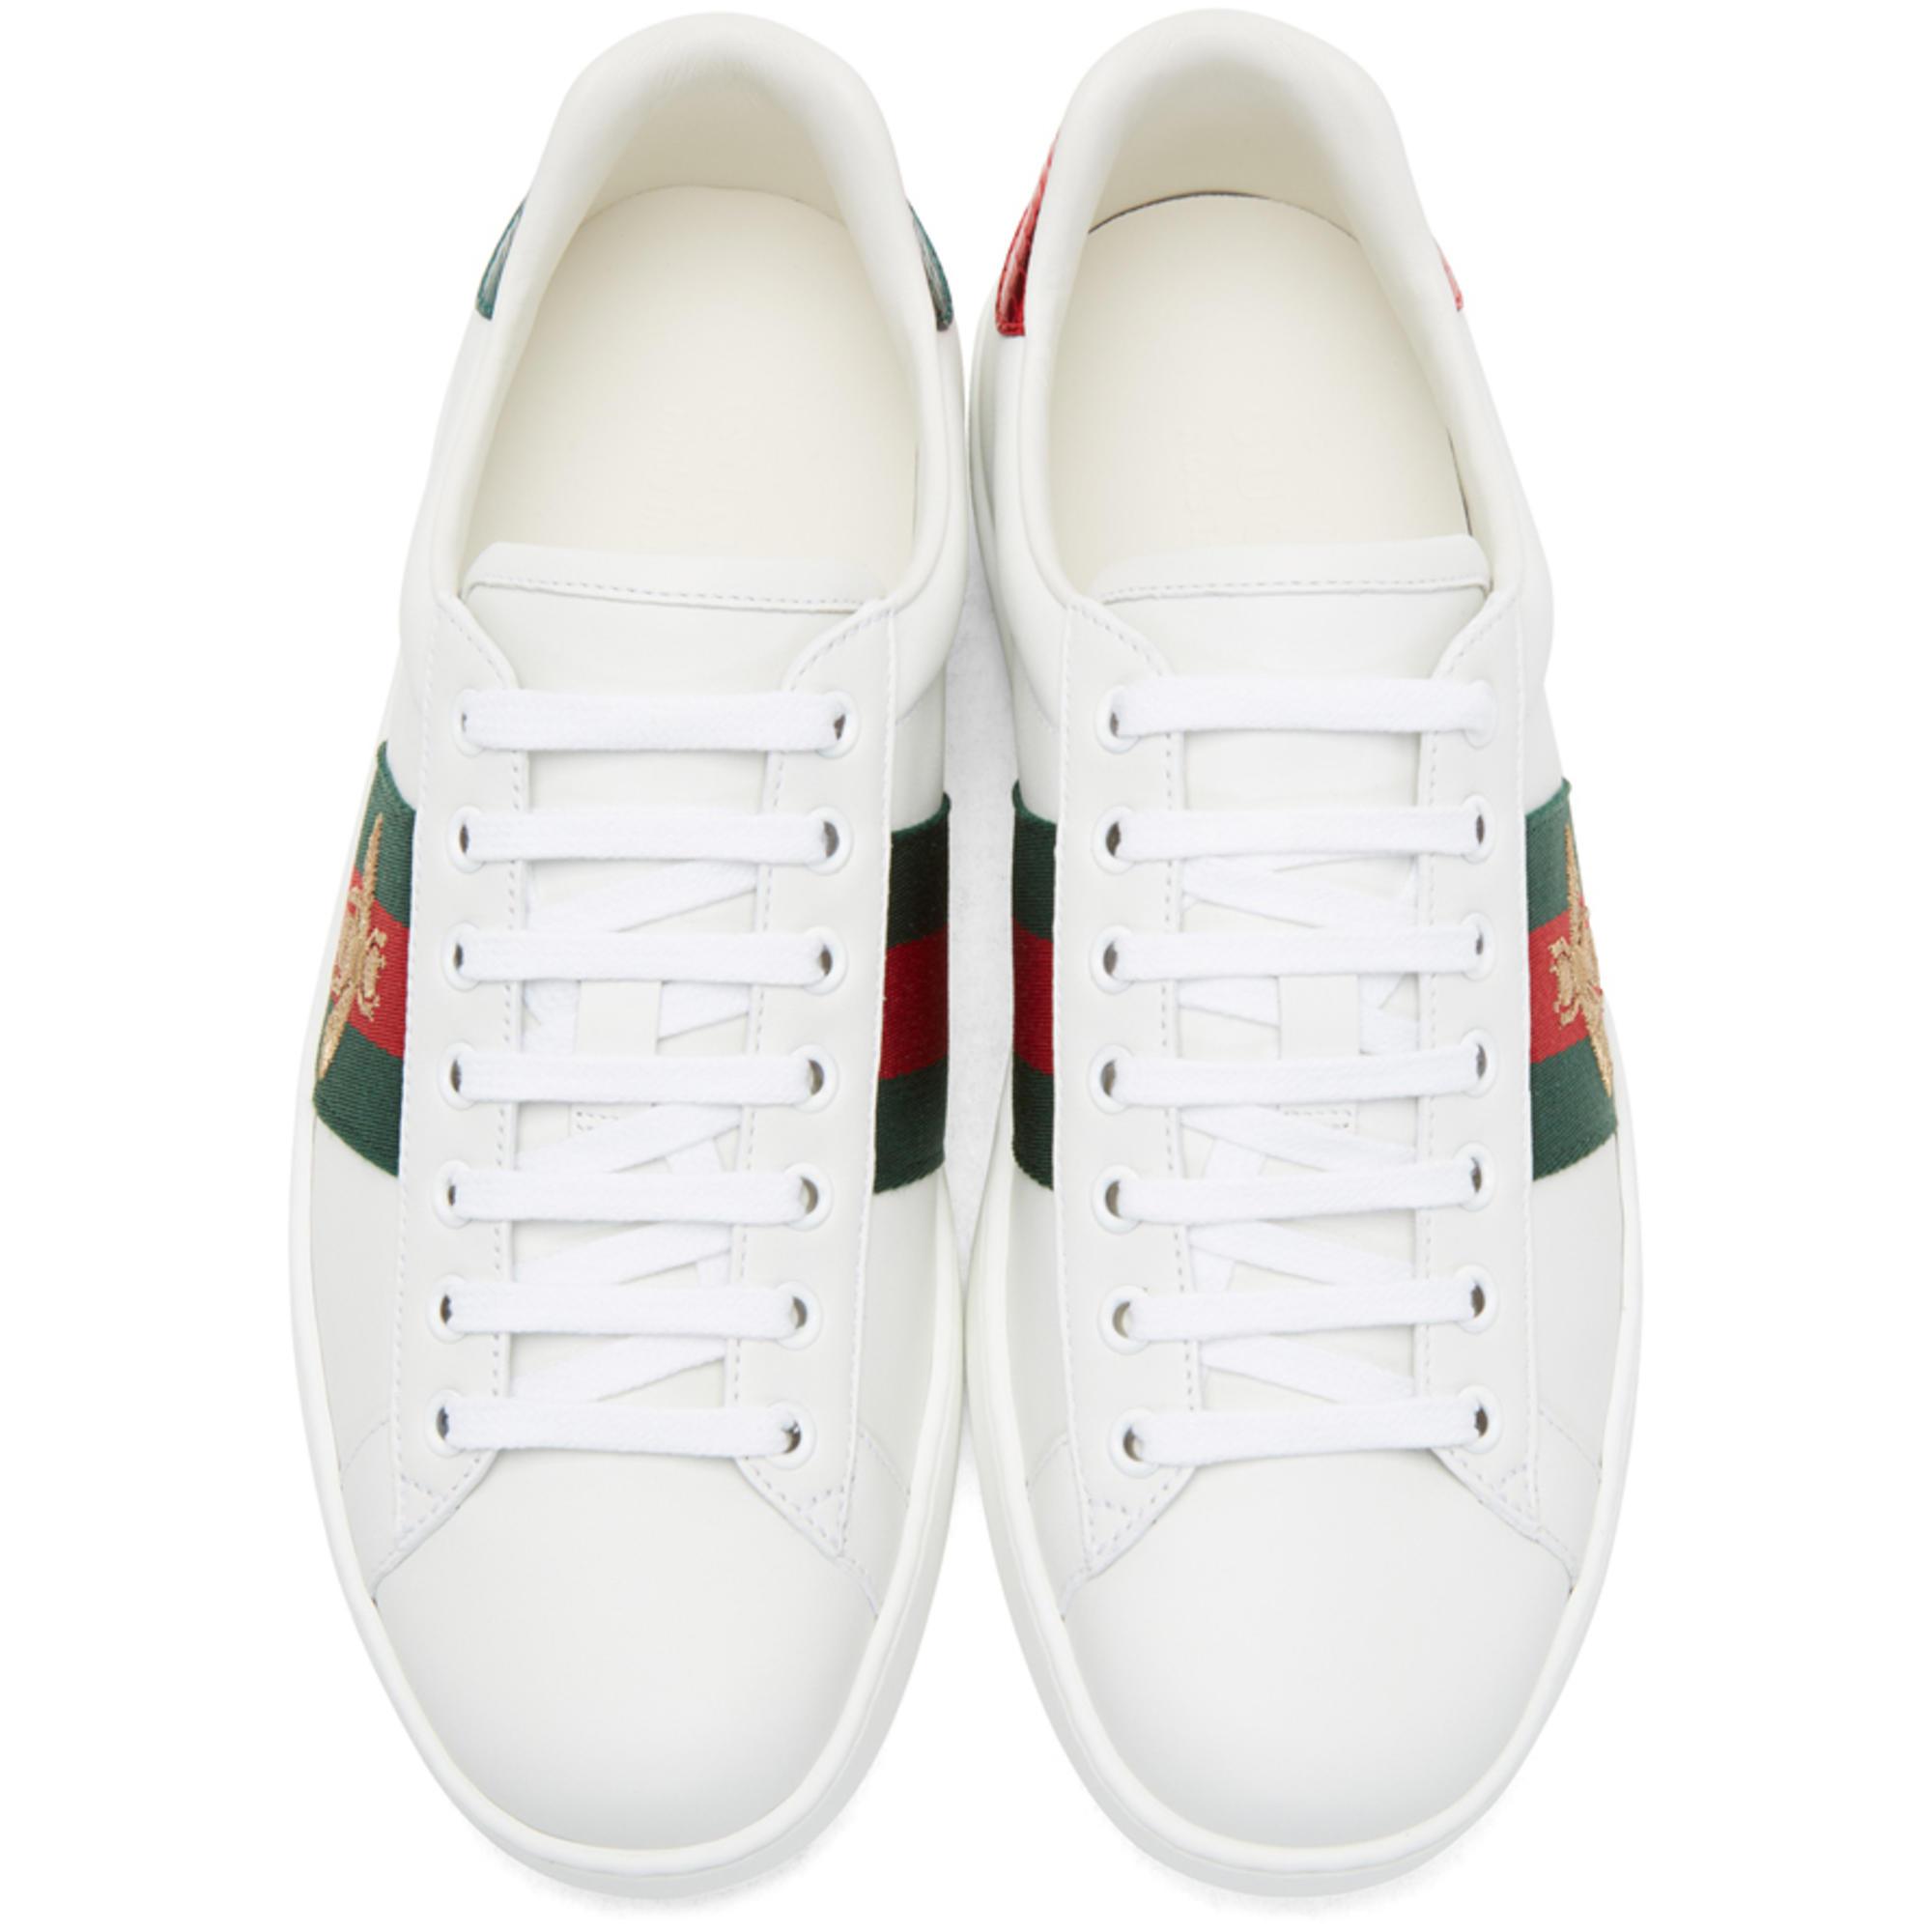 Lyst - Gucci White Bee Ace Sneakers in White for Men